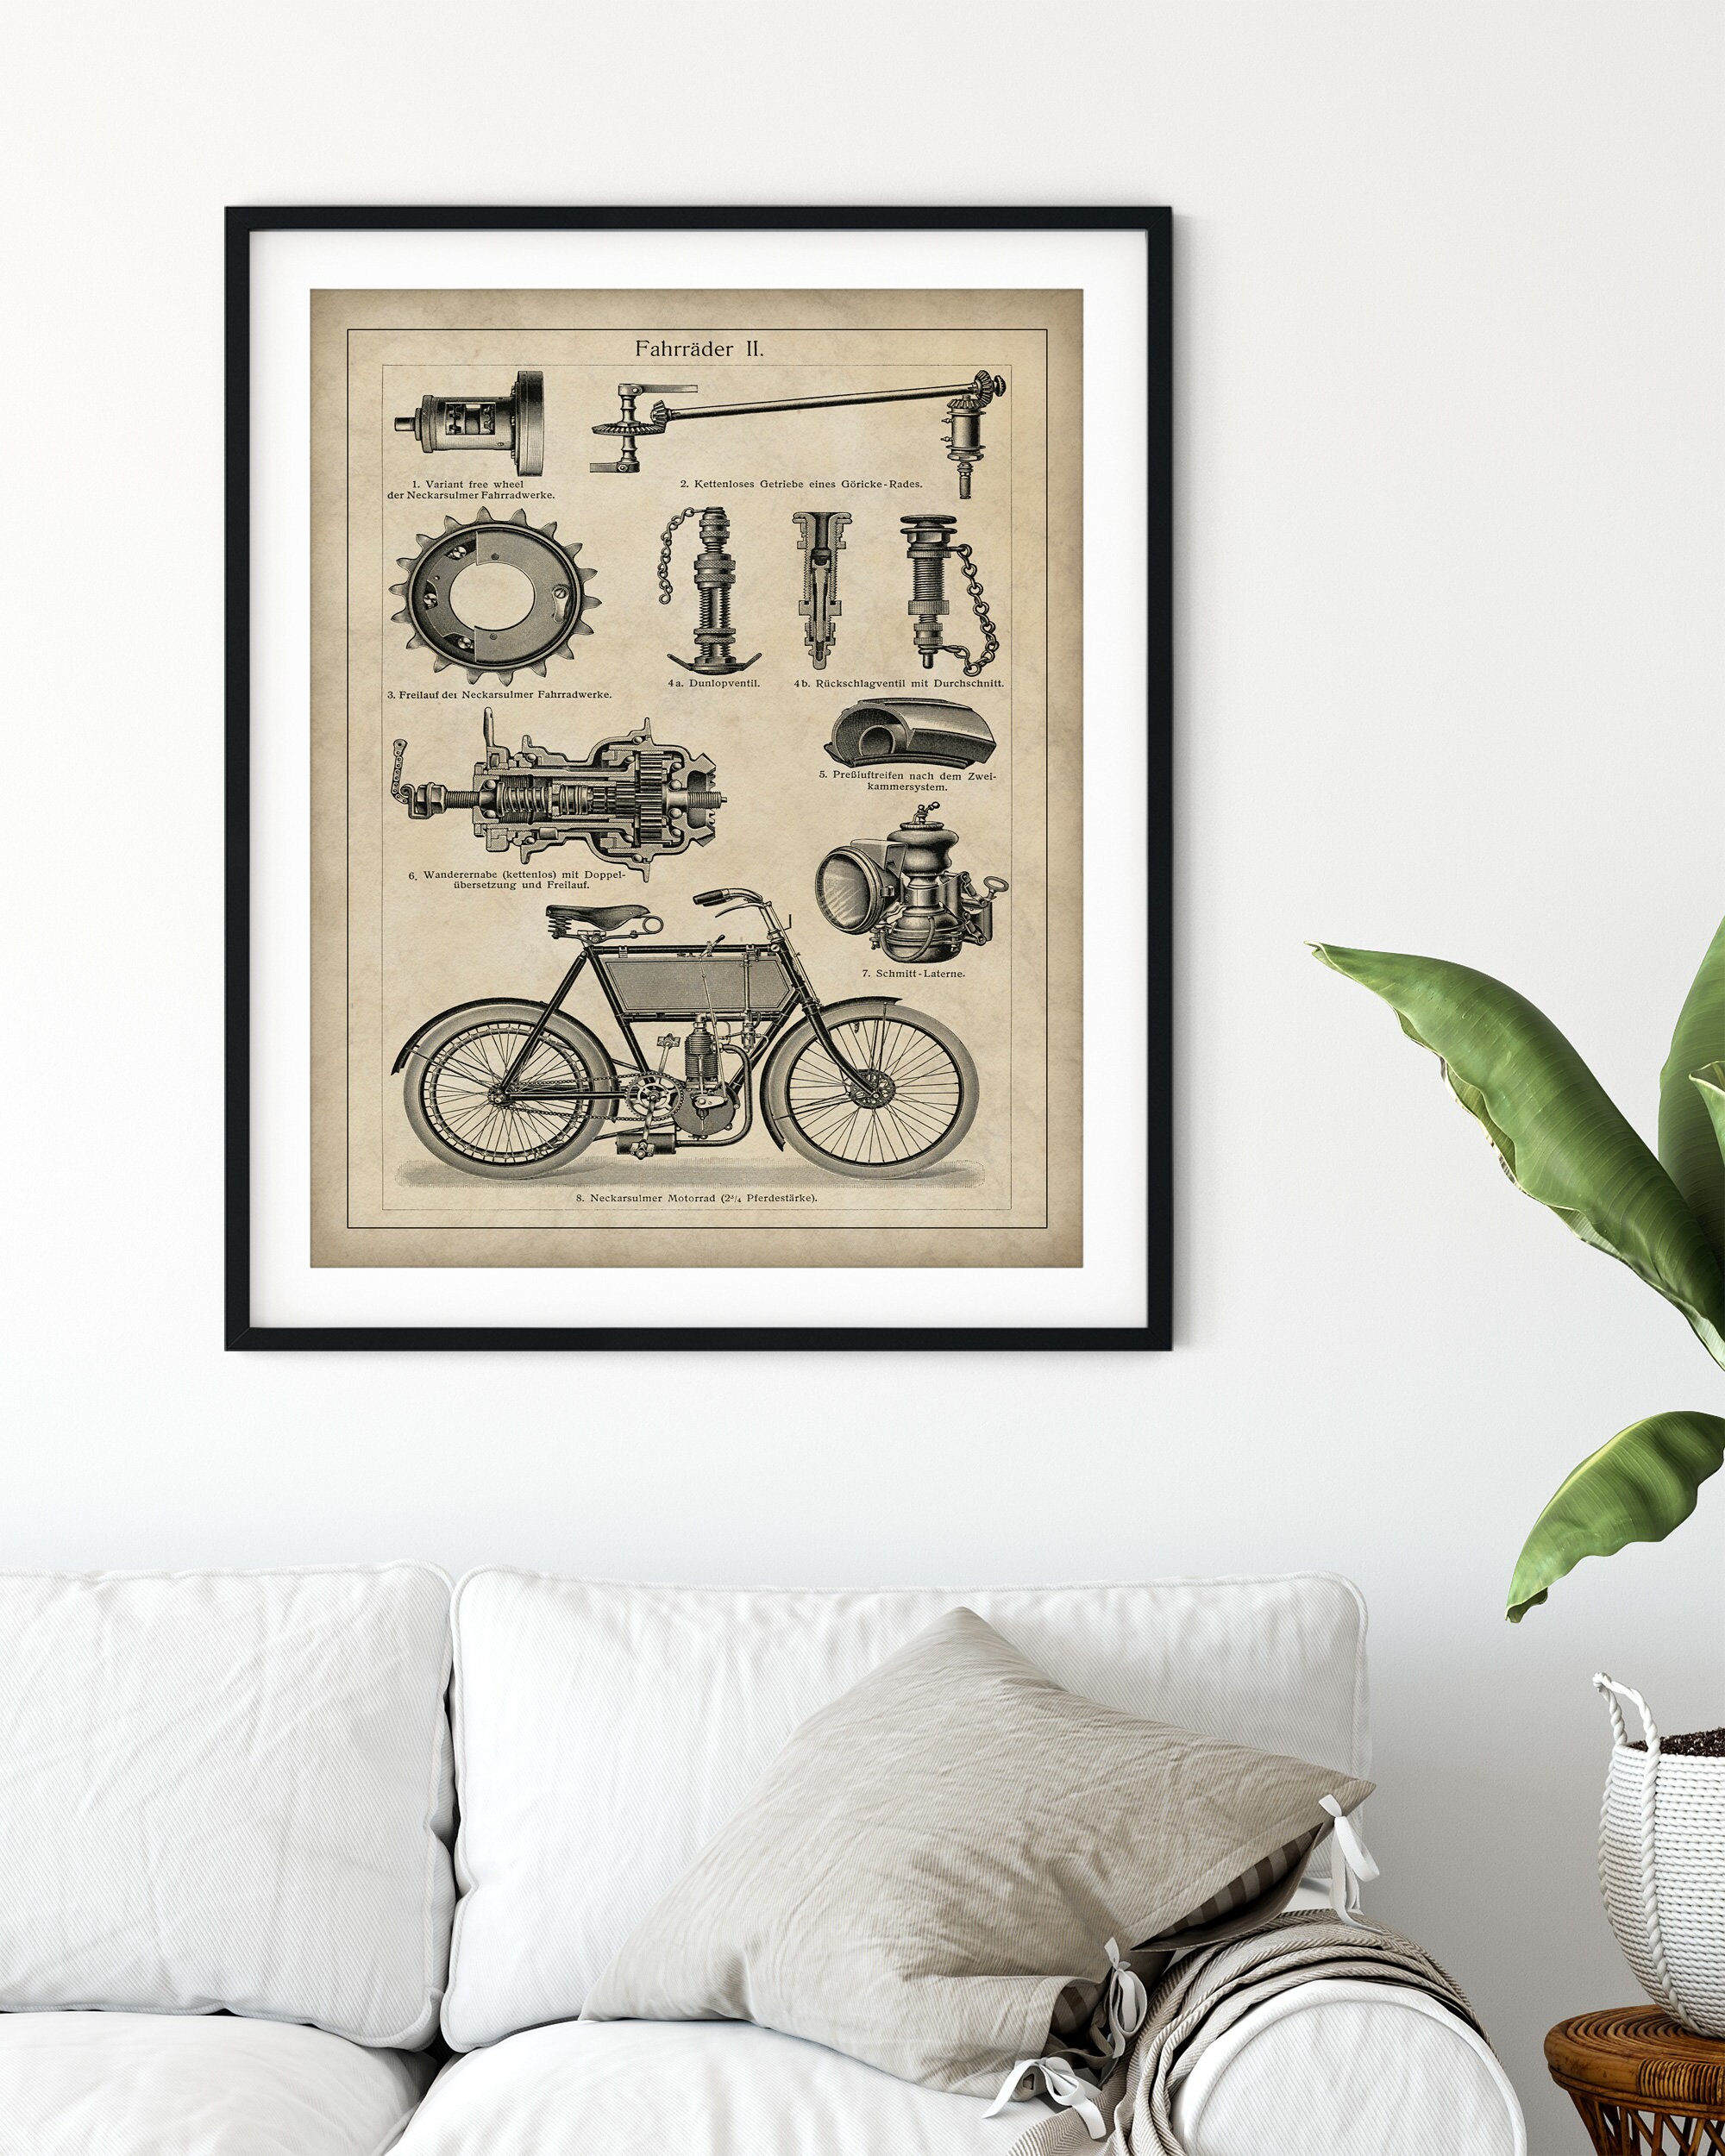 drawings of motorcycle parts